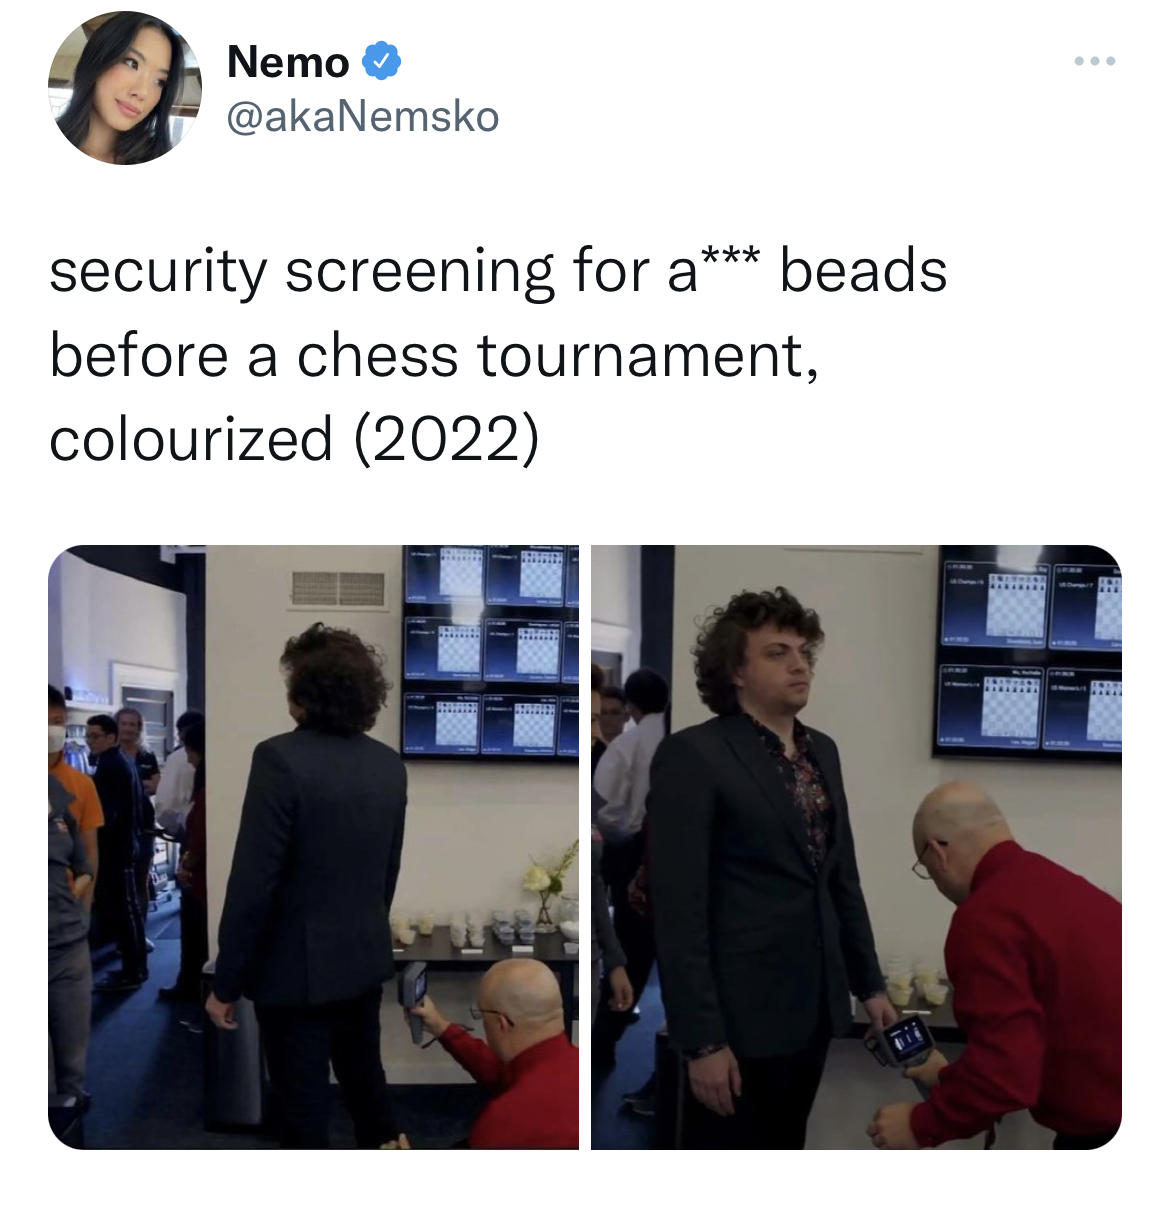 savage and funny tweets - presentation - Nemo security screening for a beads before a chess tournament, colourized 2022